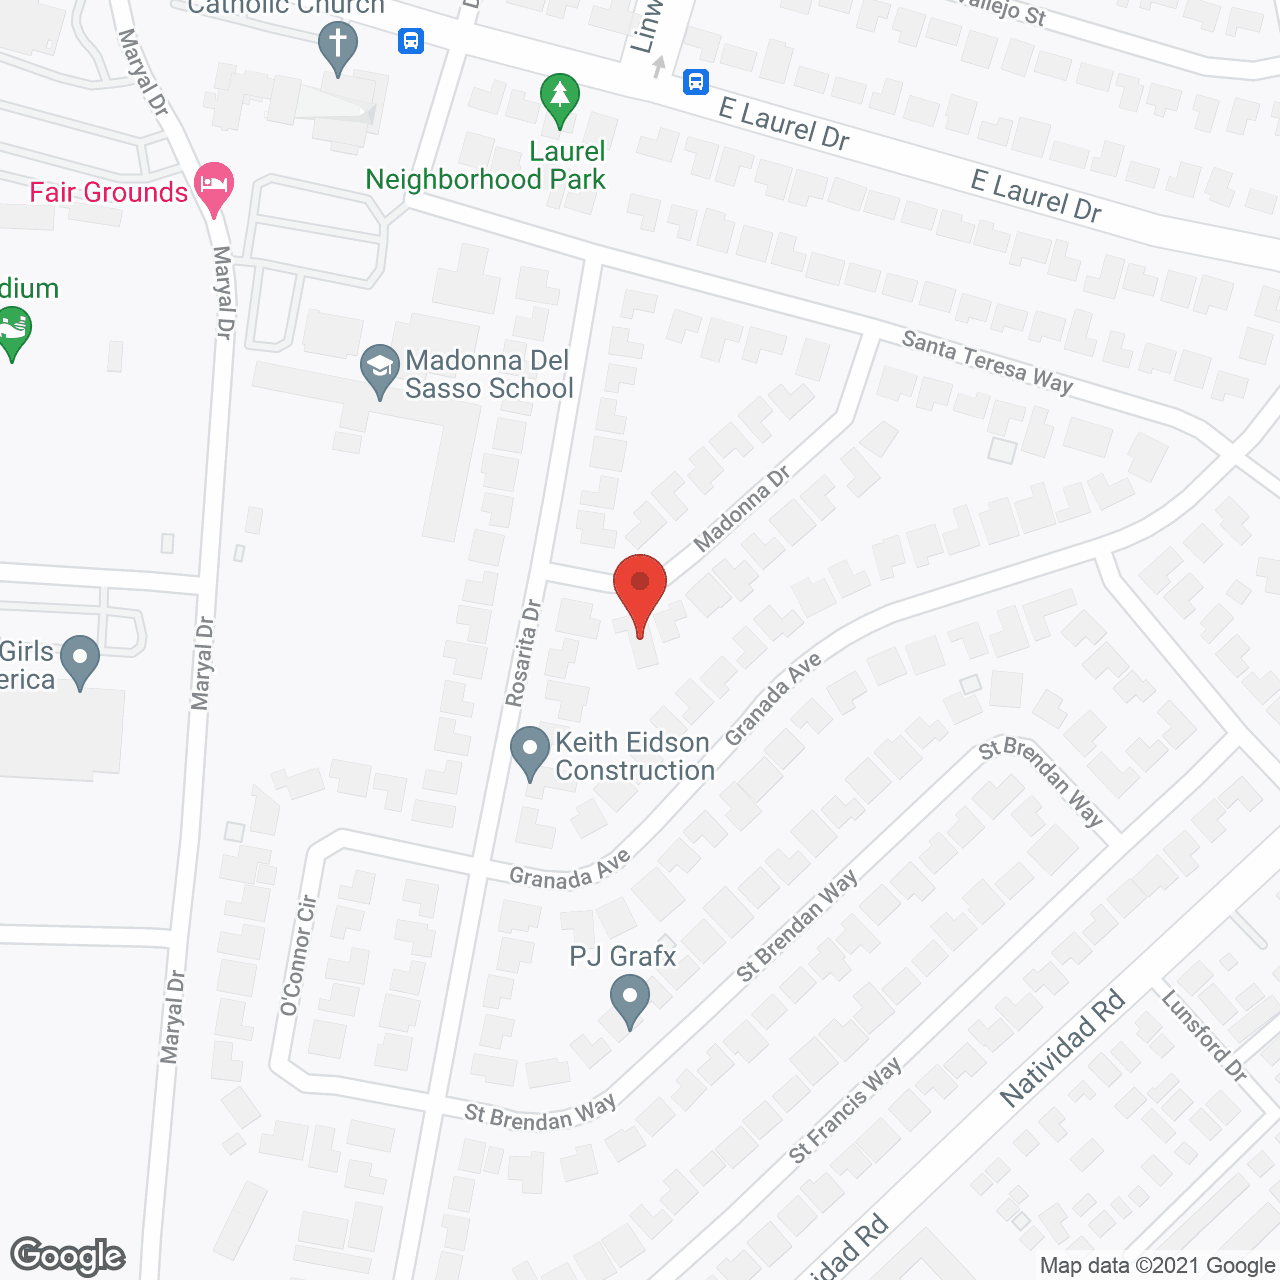 Songbird Care Home in google map